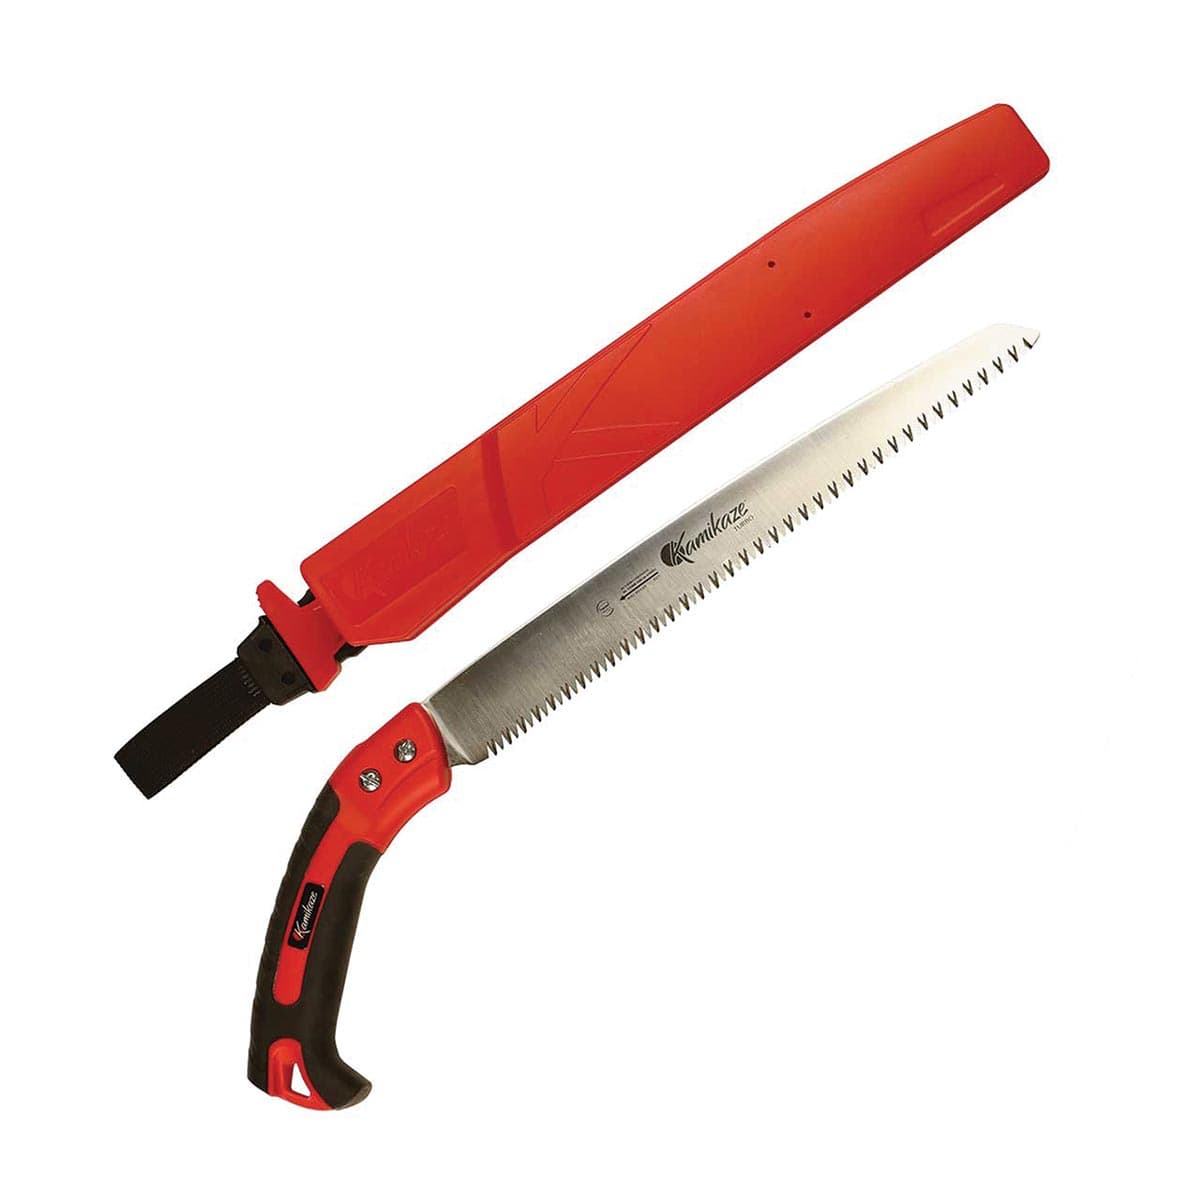 Gemplers Straight Blade Pruning Saw with 12" Blade